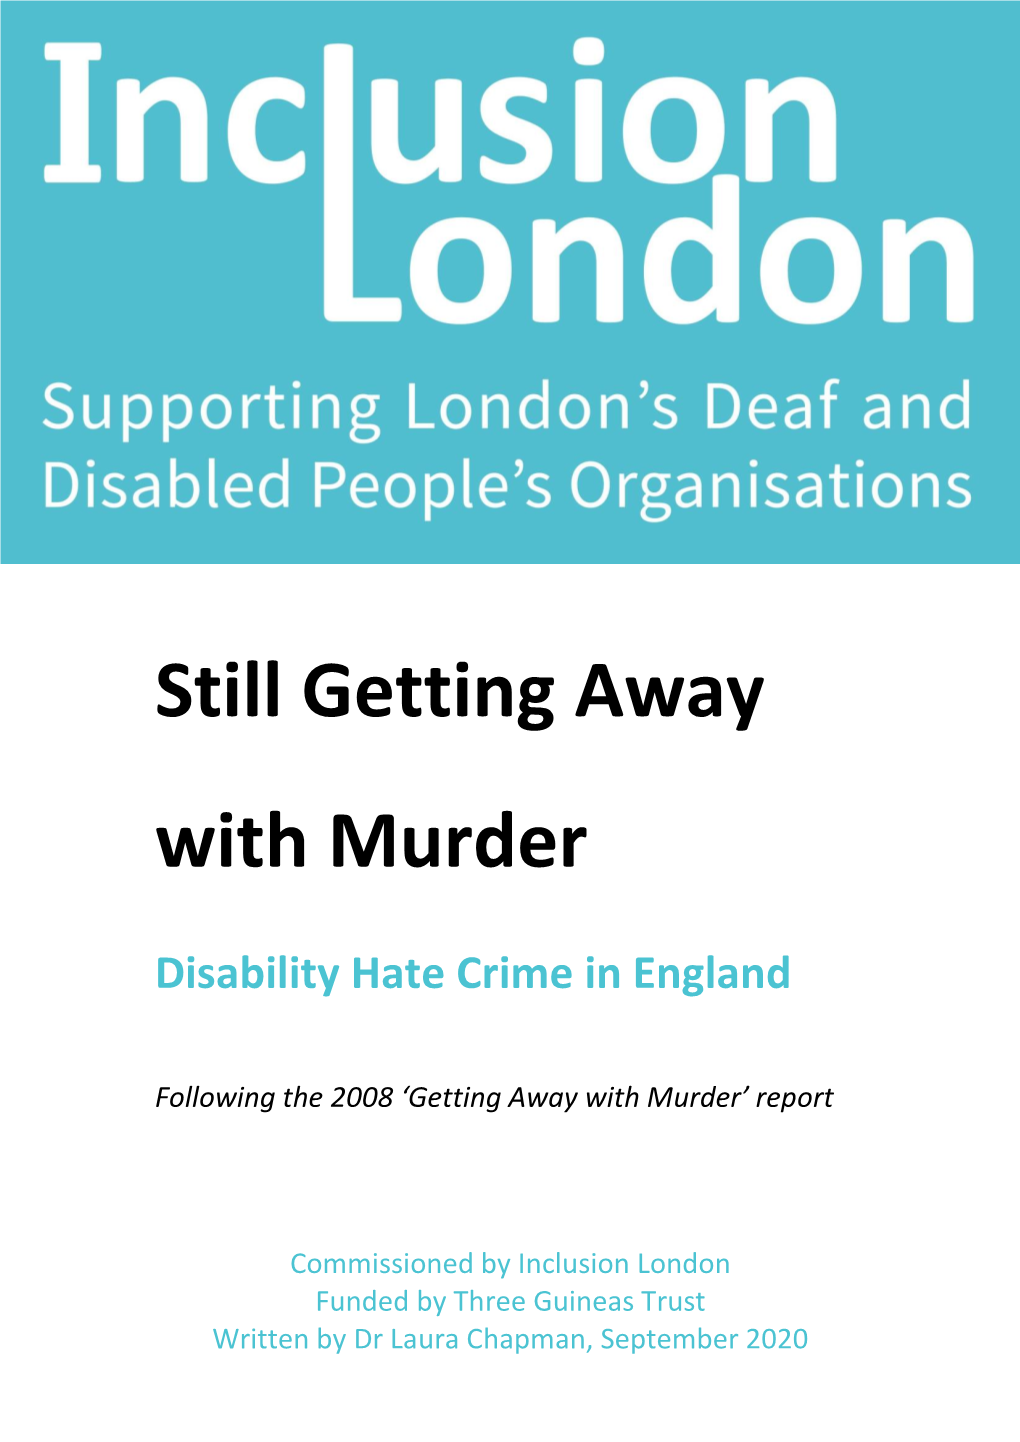 Still Getting Away with Murder: Disability Hate